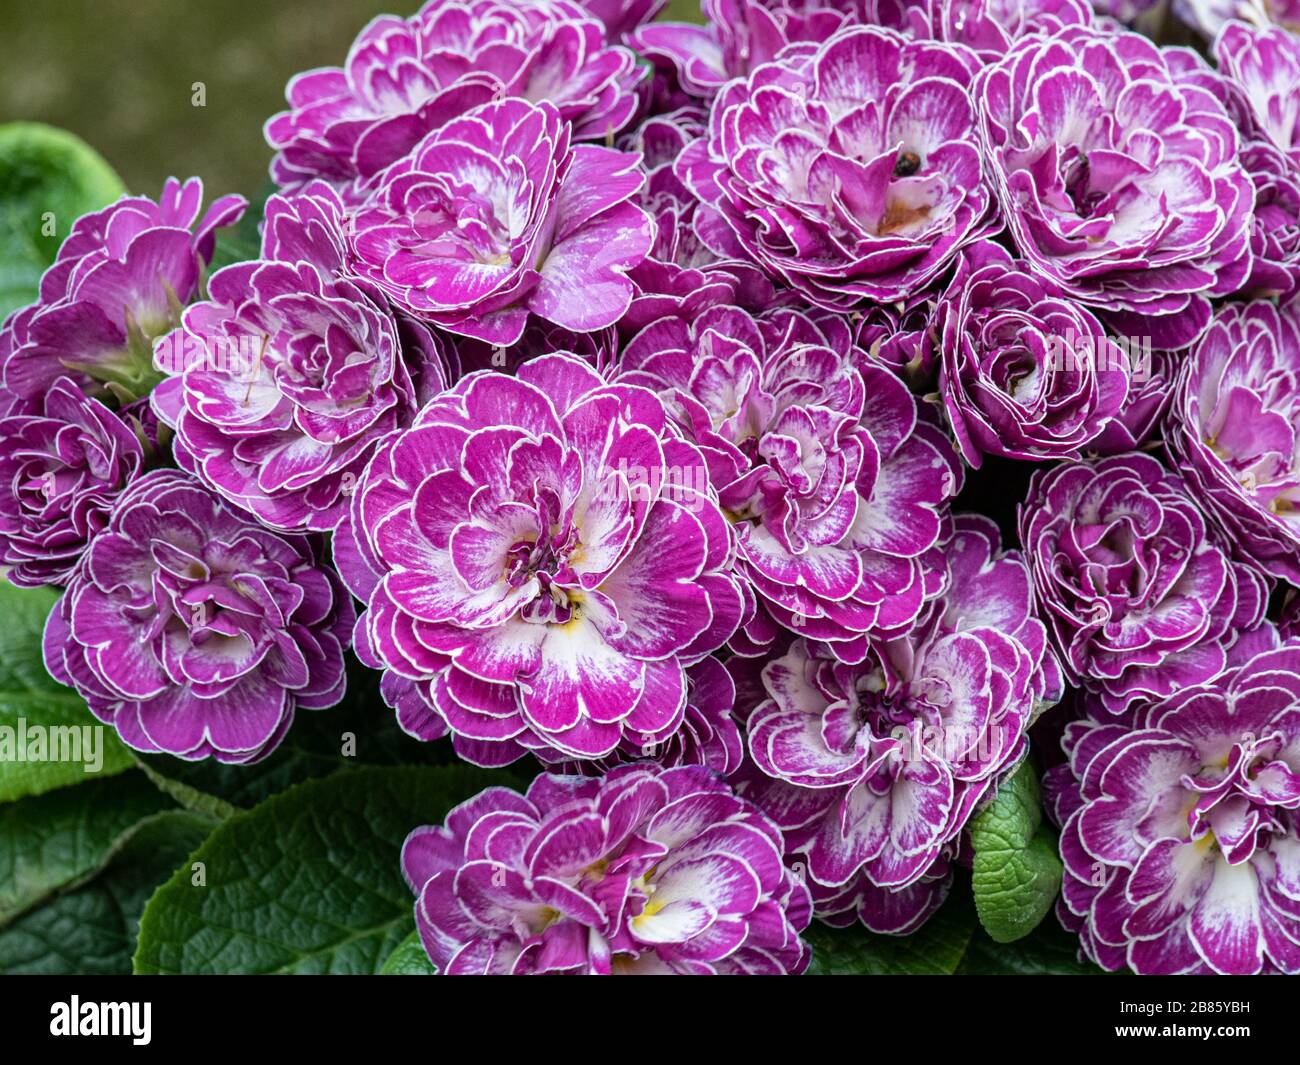 A close up of the double purple and white flowers of Belarina Primula Candy Frost Stock Photo